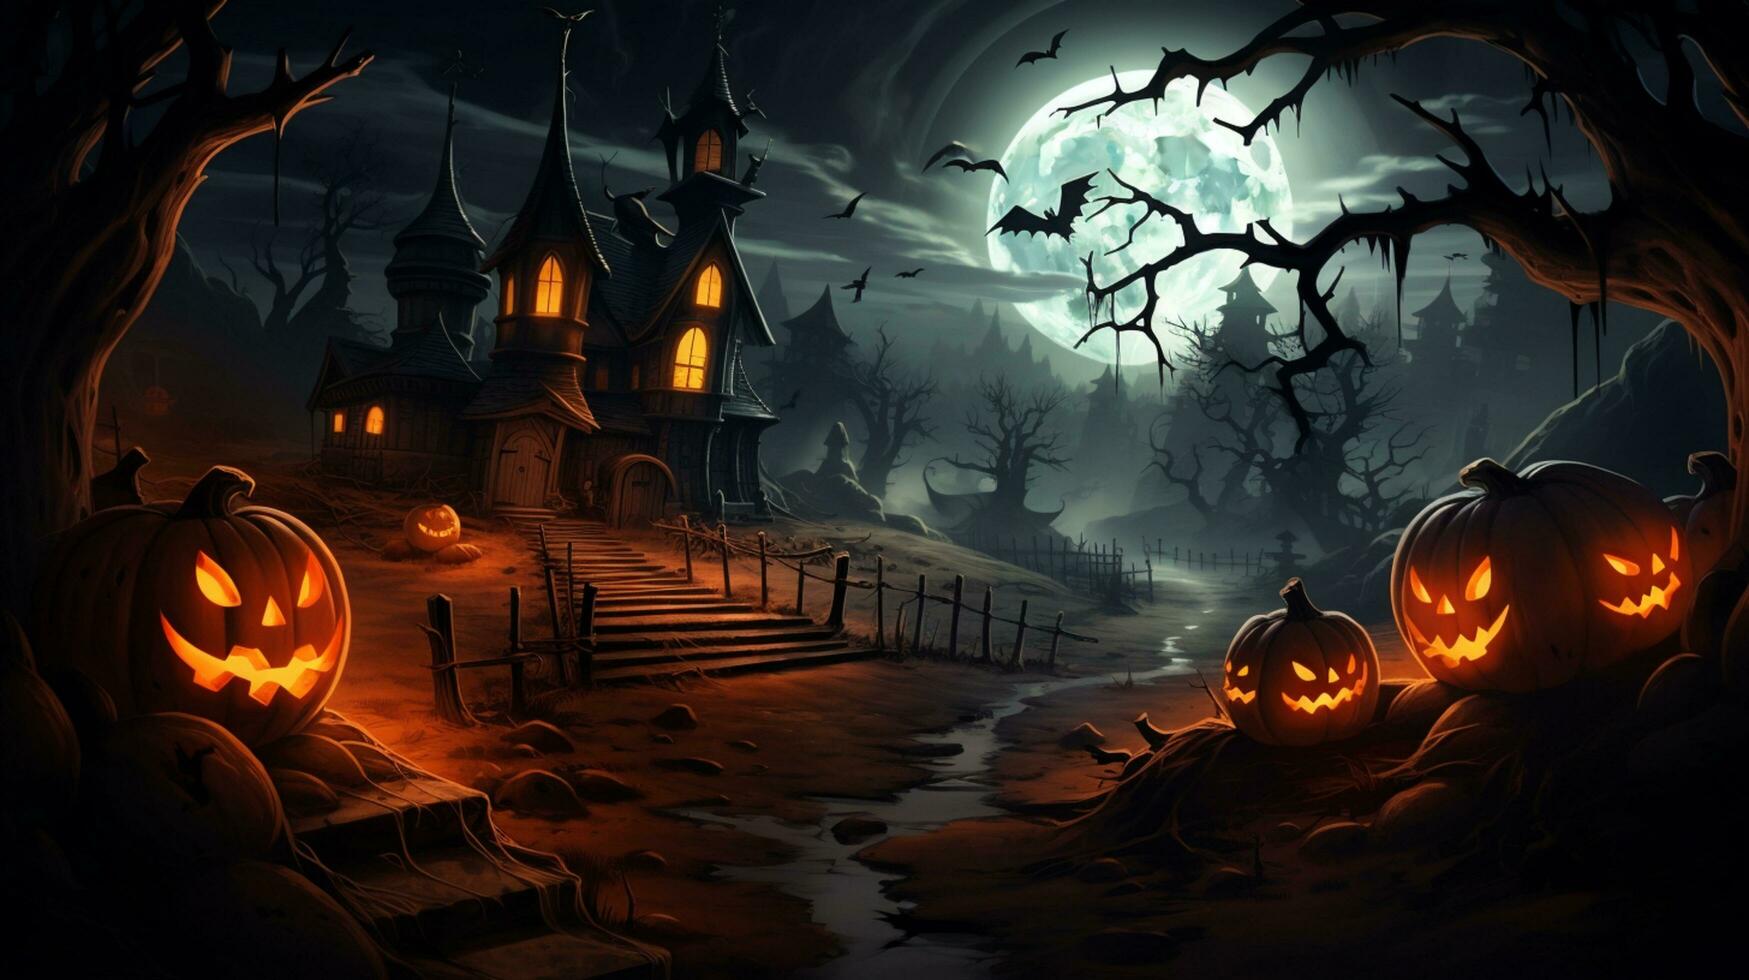 Halloween background with pumpkins and haunted house - Halloween background with Evil Pumpkin. Spooky scary dark Night forrest. Holiday event halloween banner background concept photo